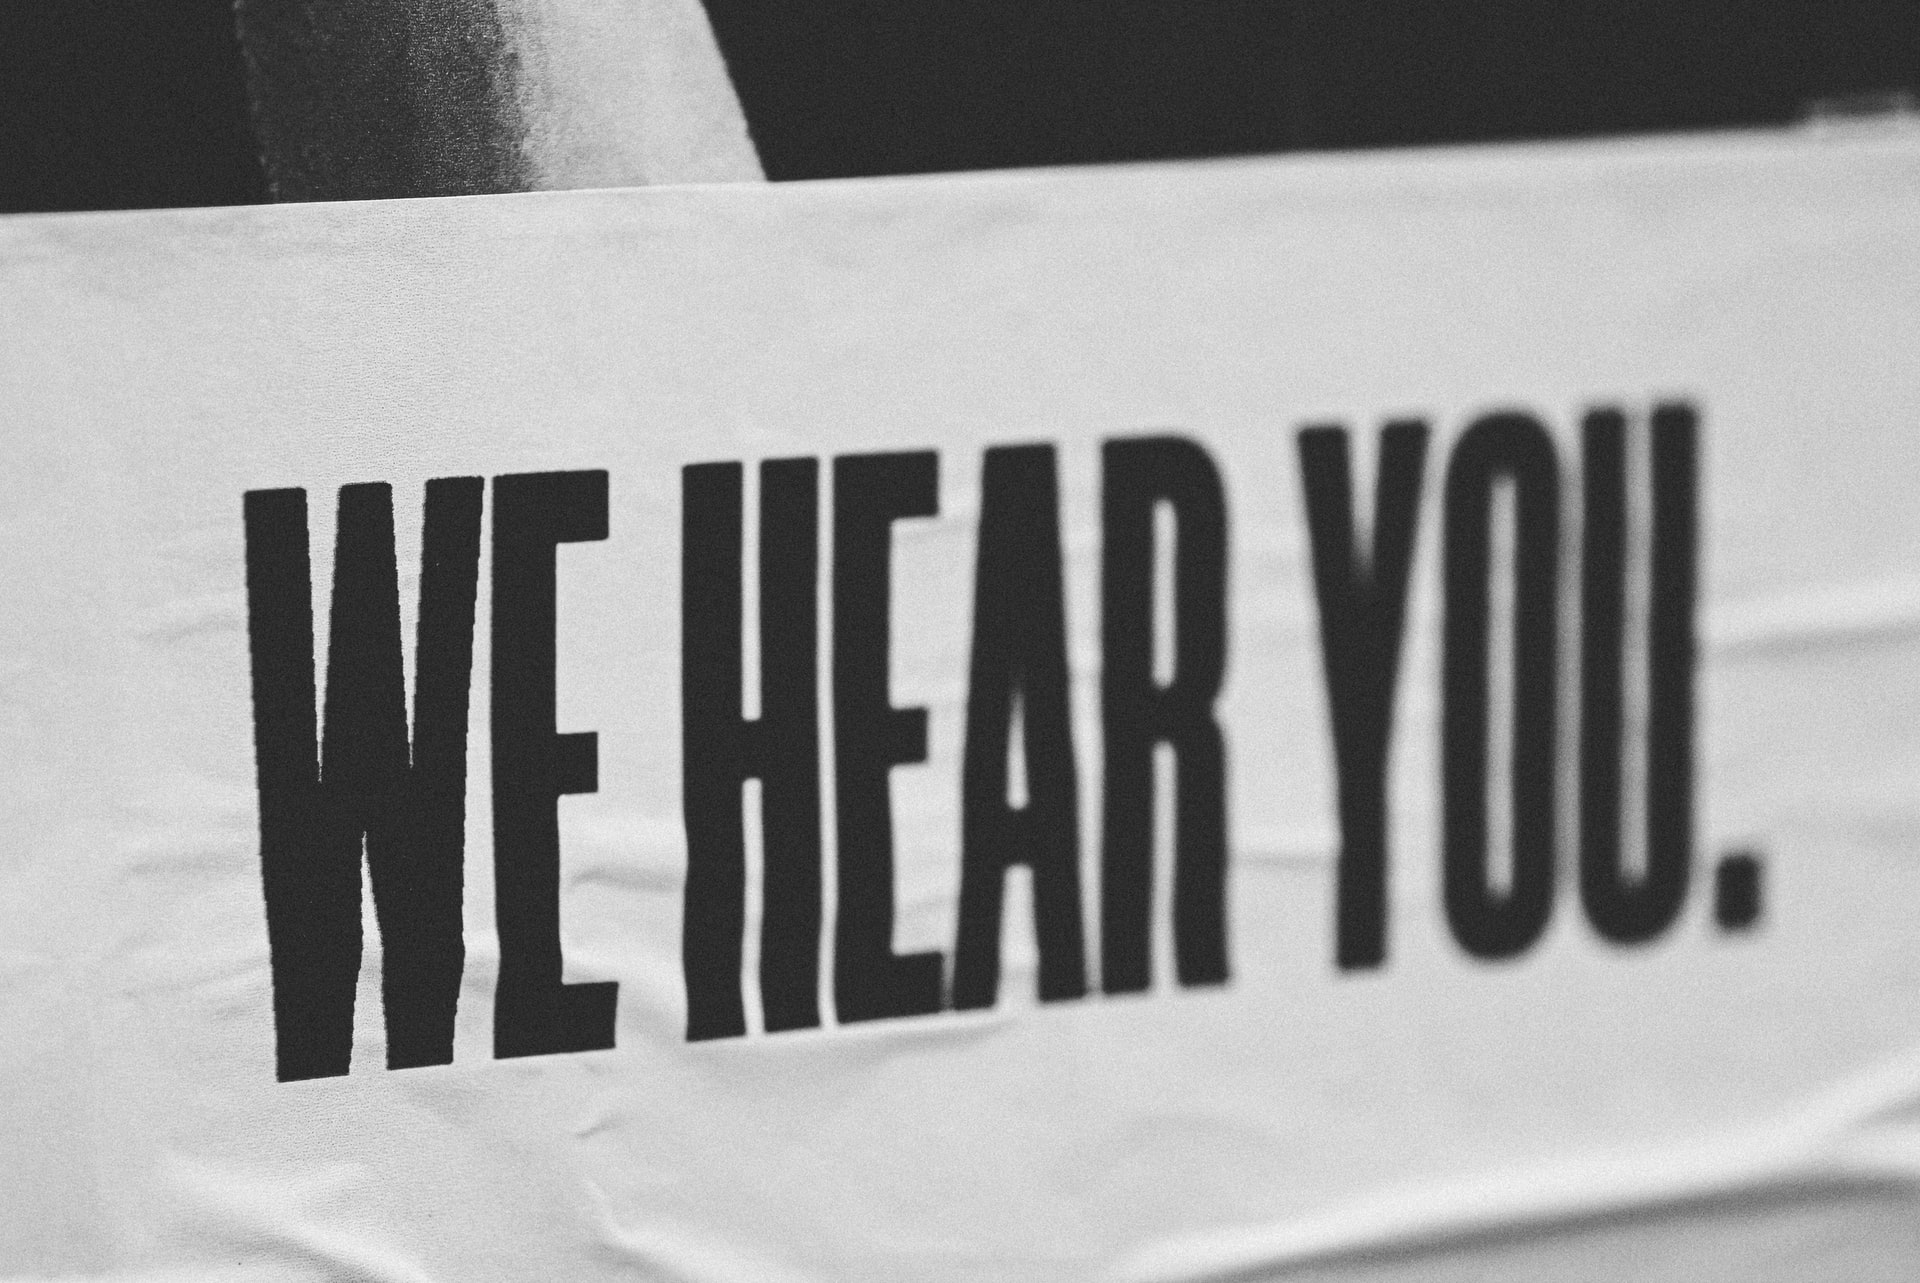 Poster reading 'We hear You' or bold, block caps